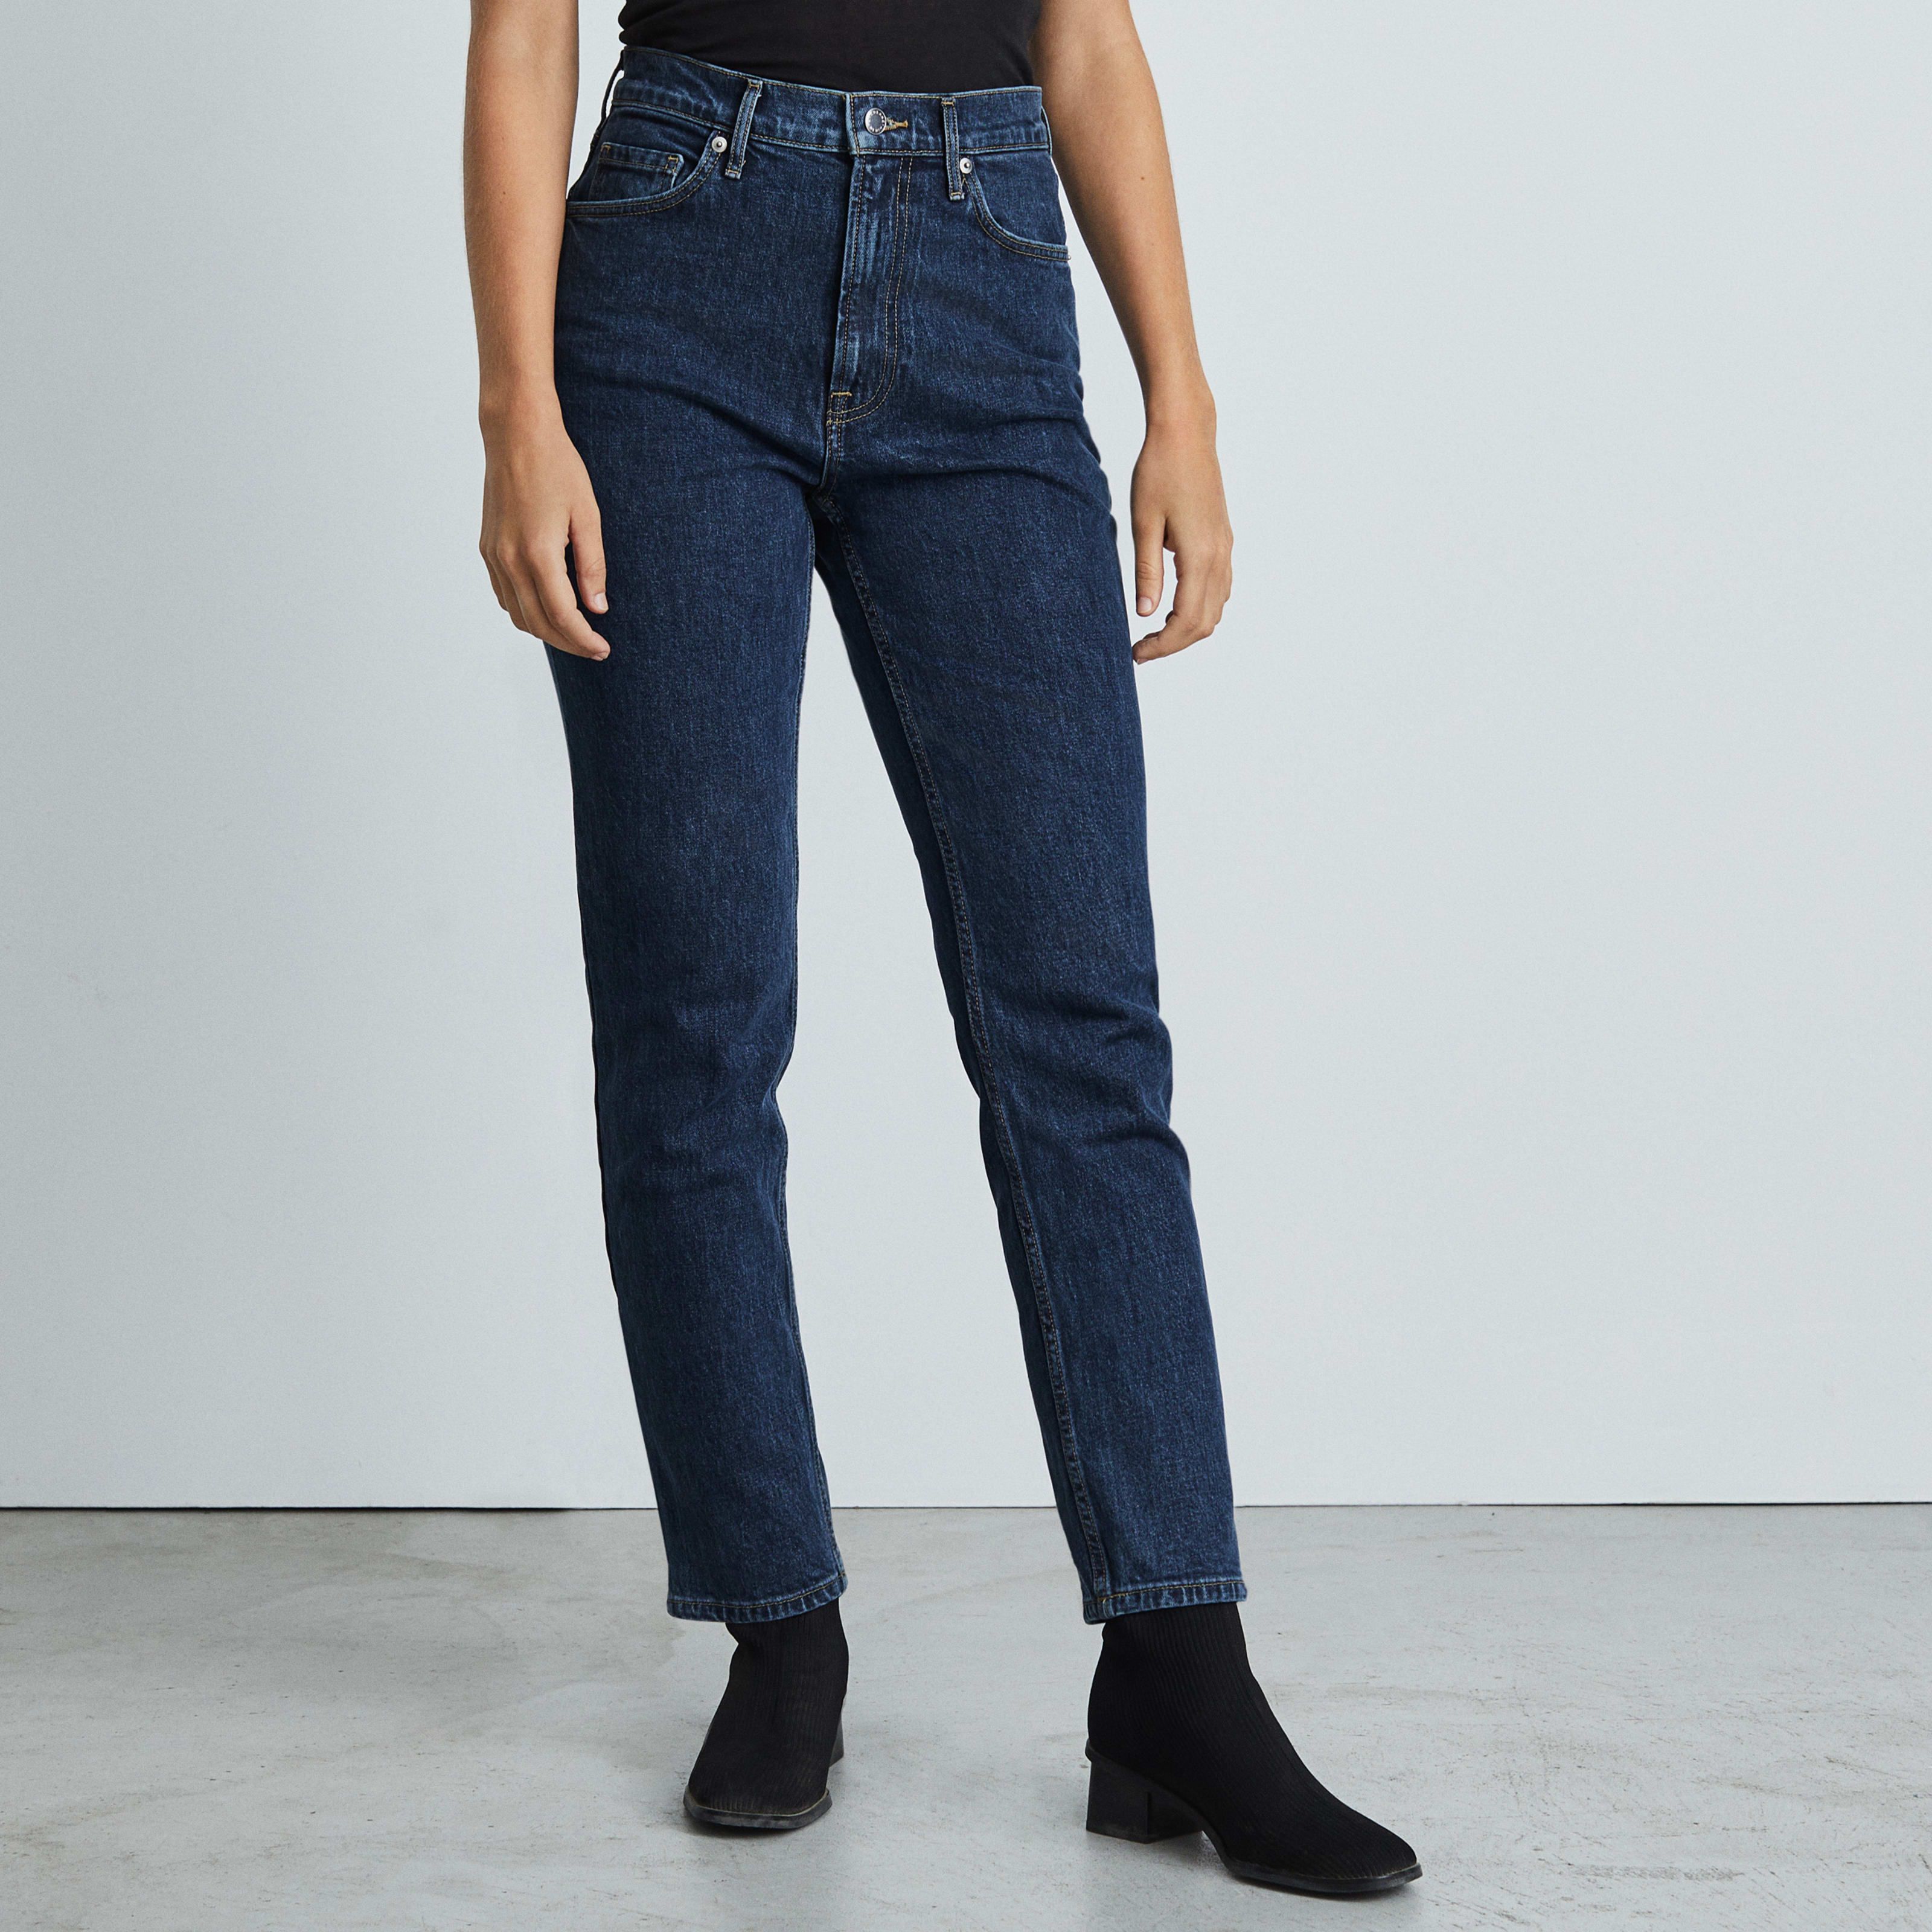 Women's Original Cheeky Jean by Everlane in Washed Midnight, Size 26 | Everlane